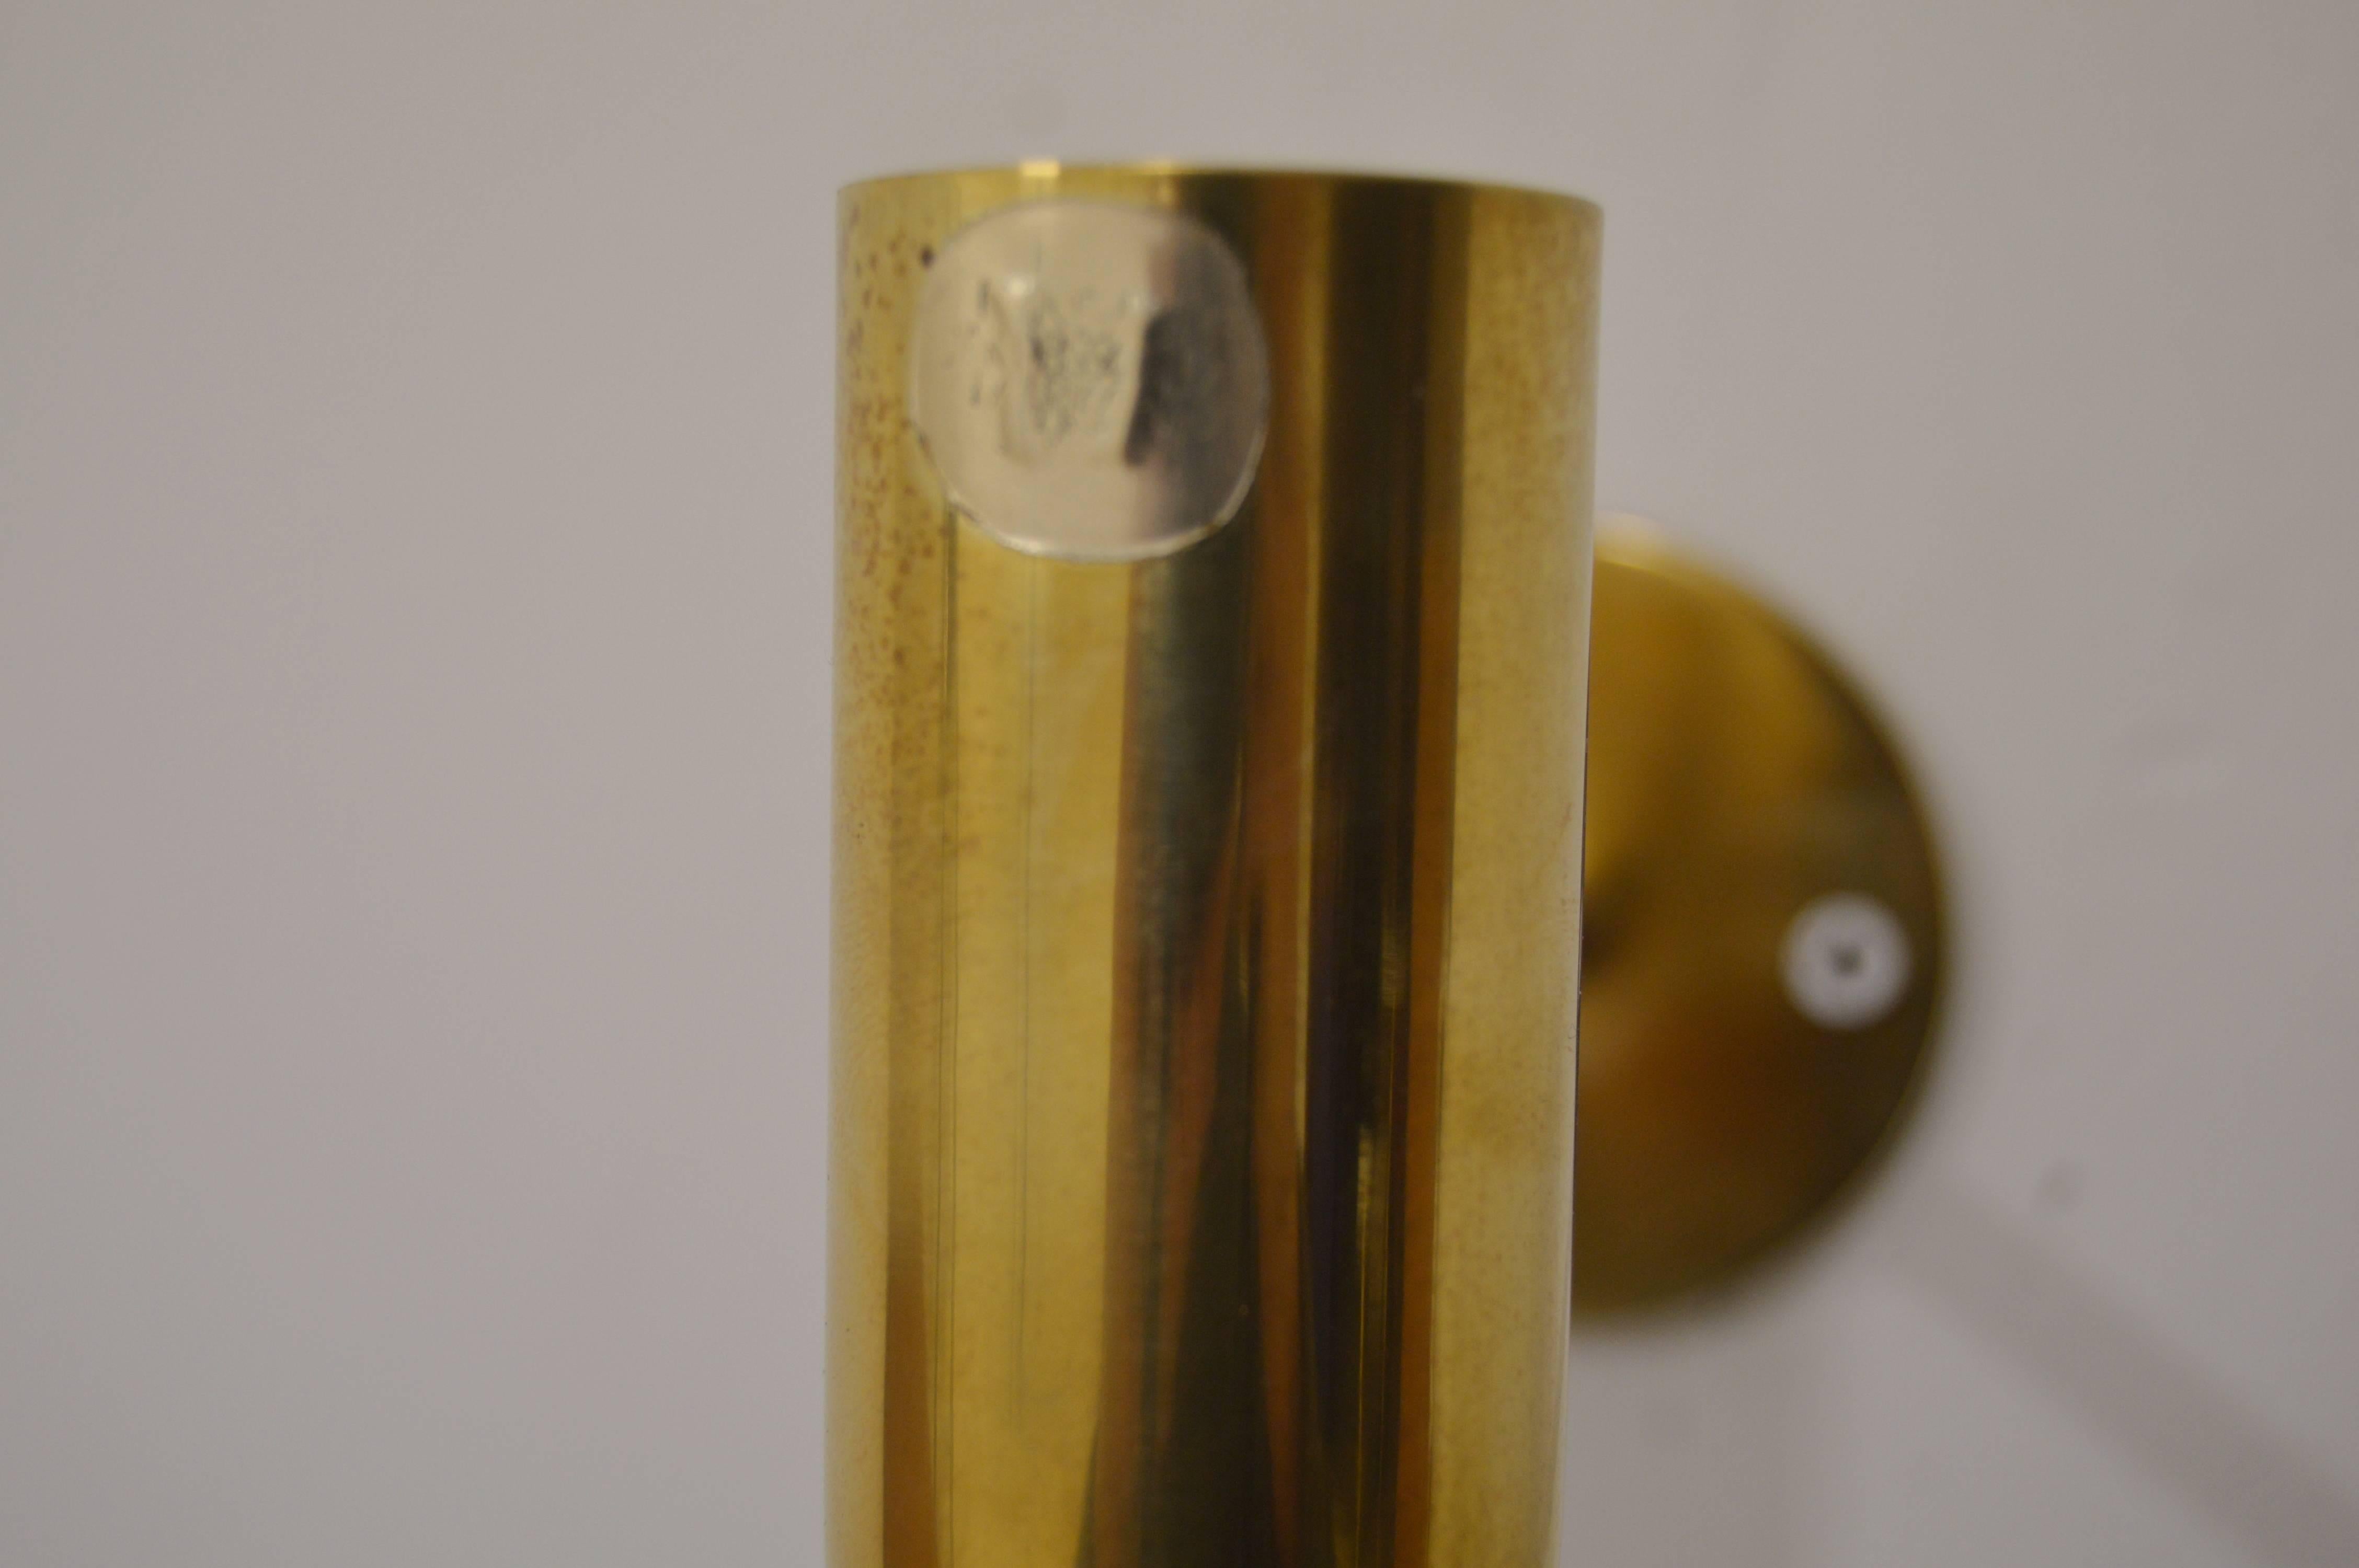 Scandinavian Modern L180 Wall-Mounted Brass and Glass Candle Holder by Hans-Agne Jakobsson For Sale